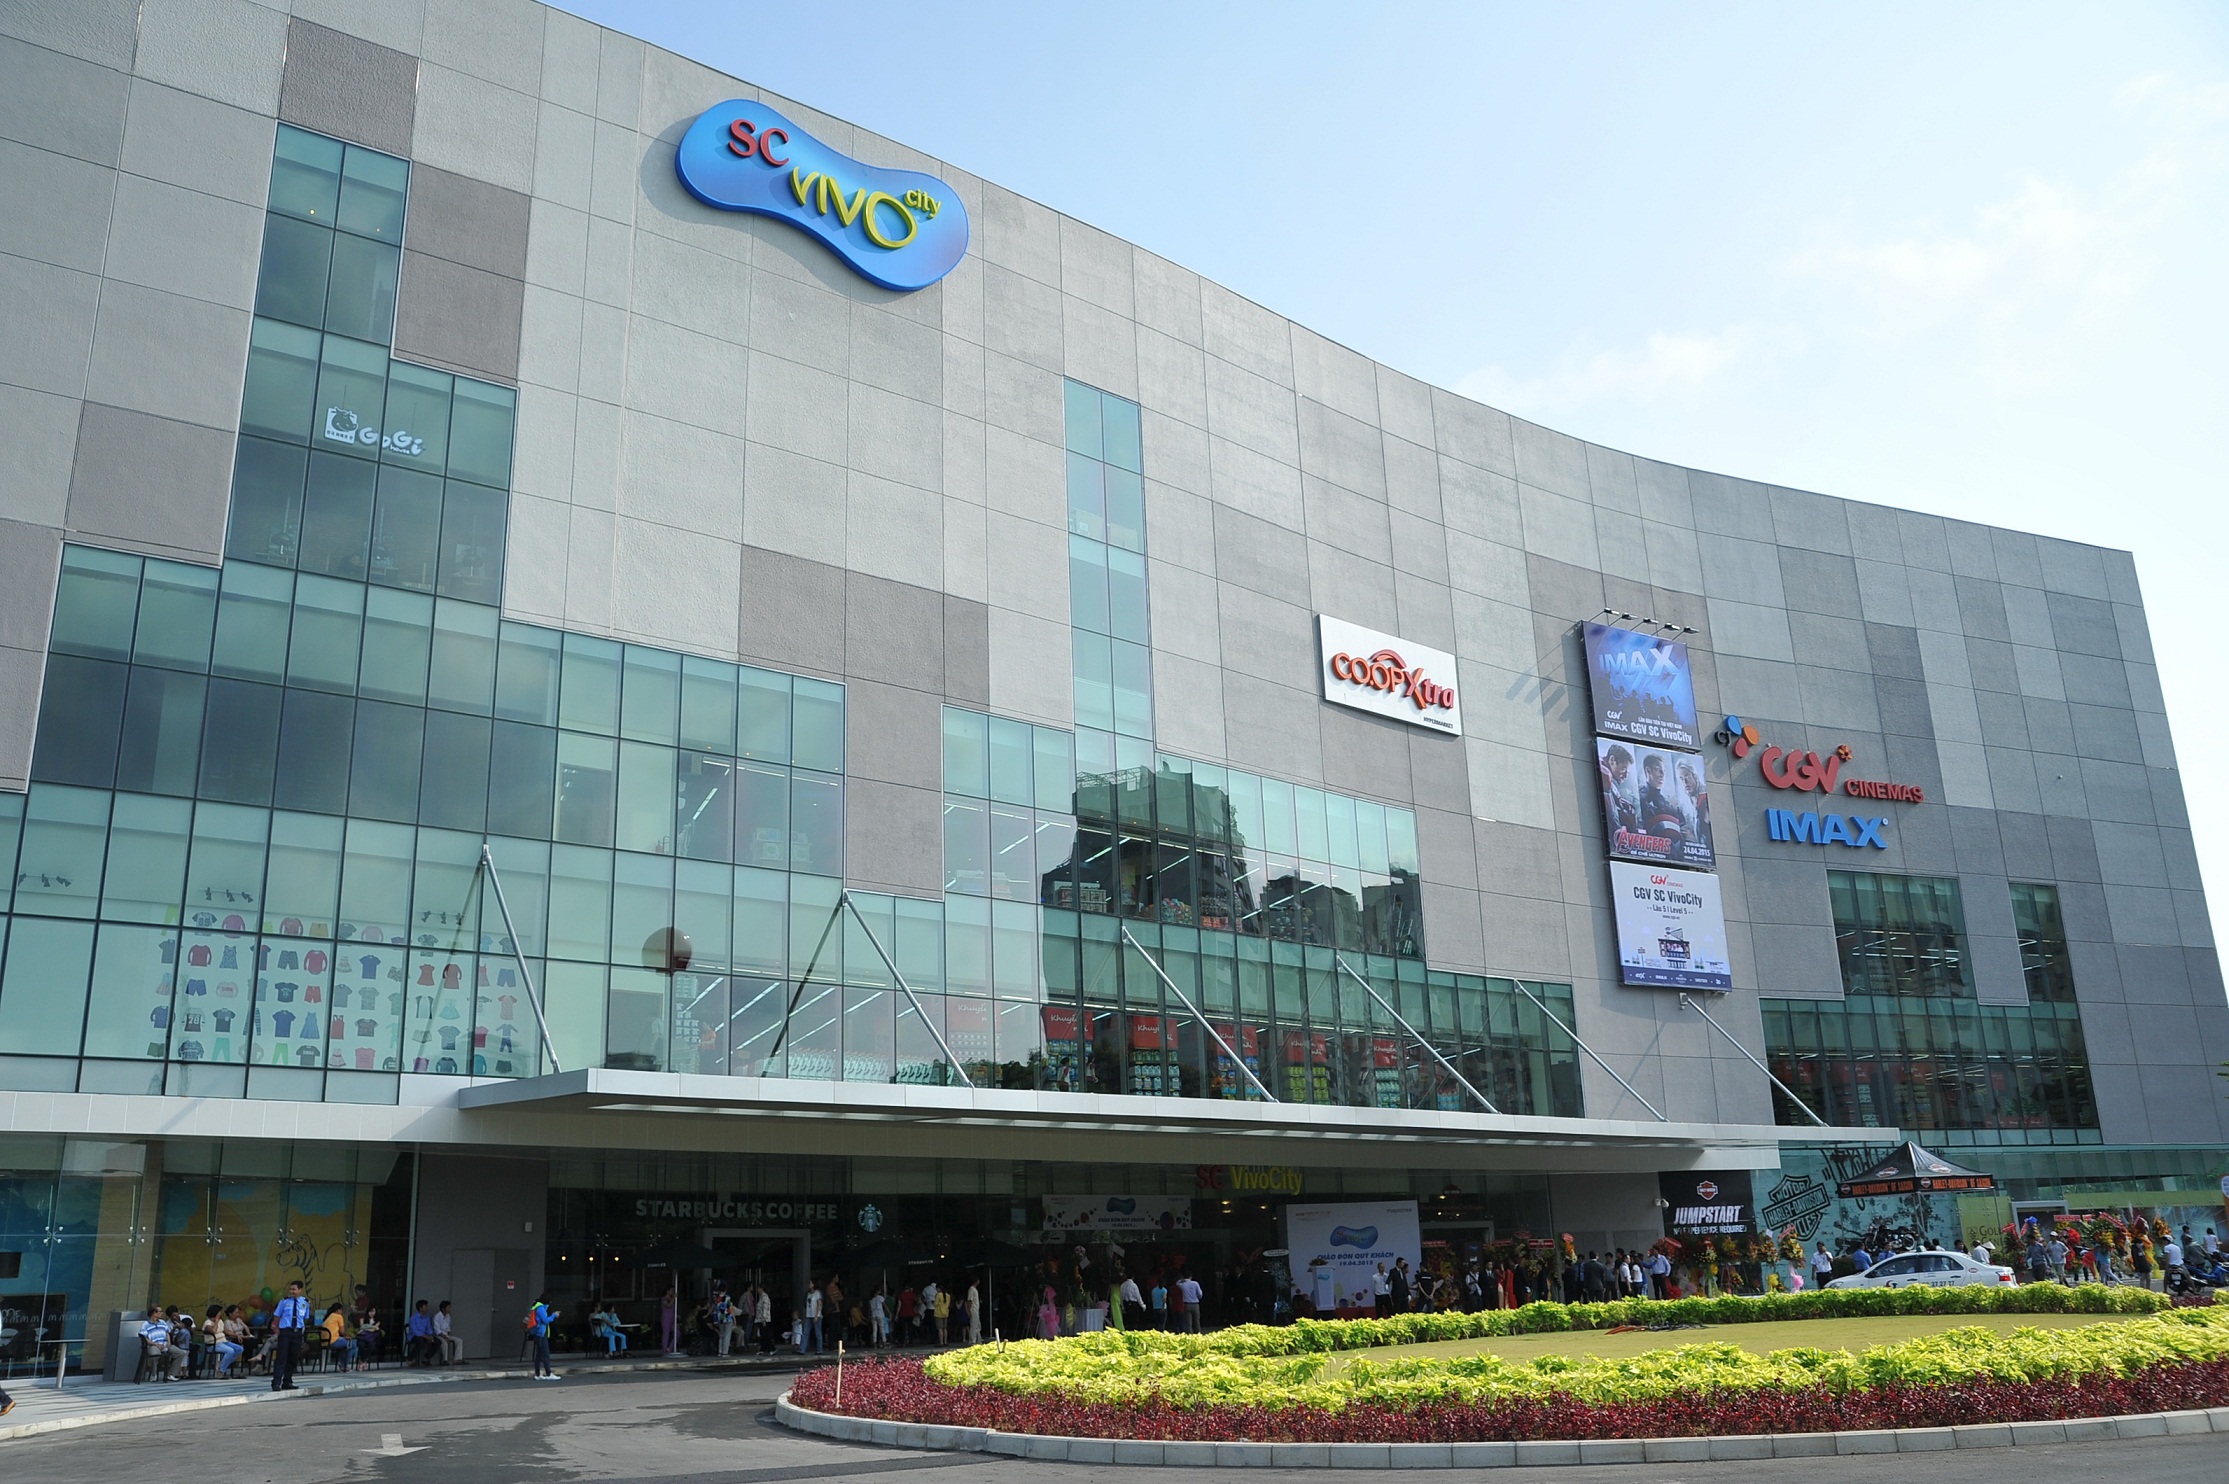 SC VivoCity welcomes about 60,000 arrivals on Soft Opening Day